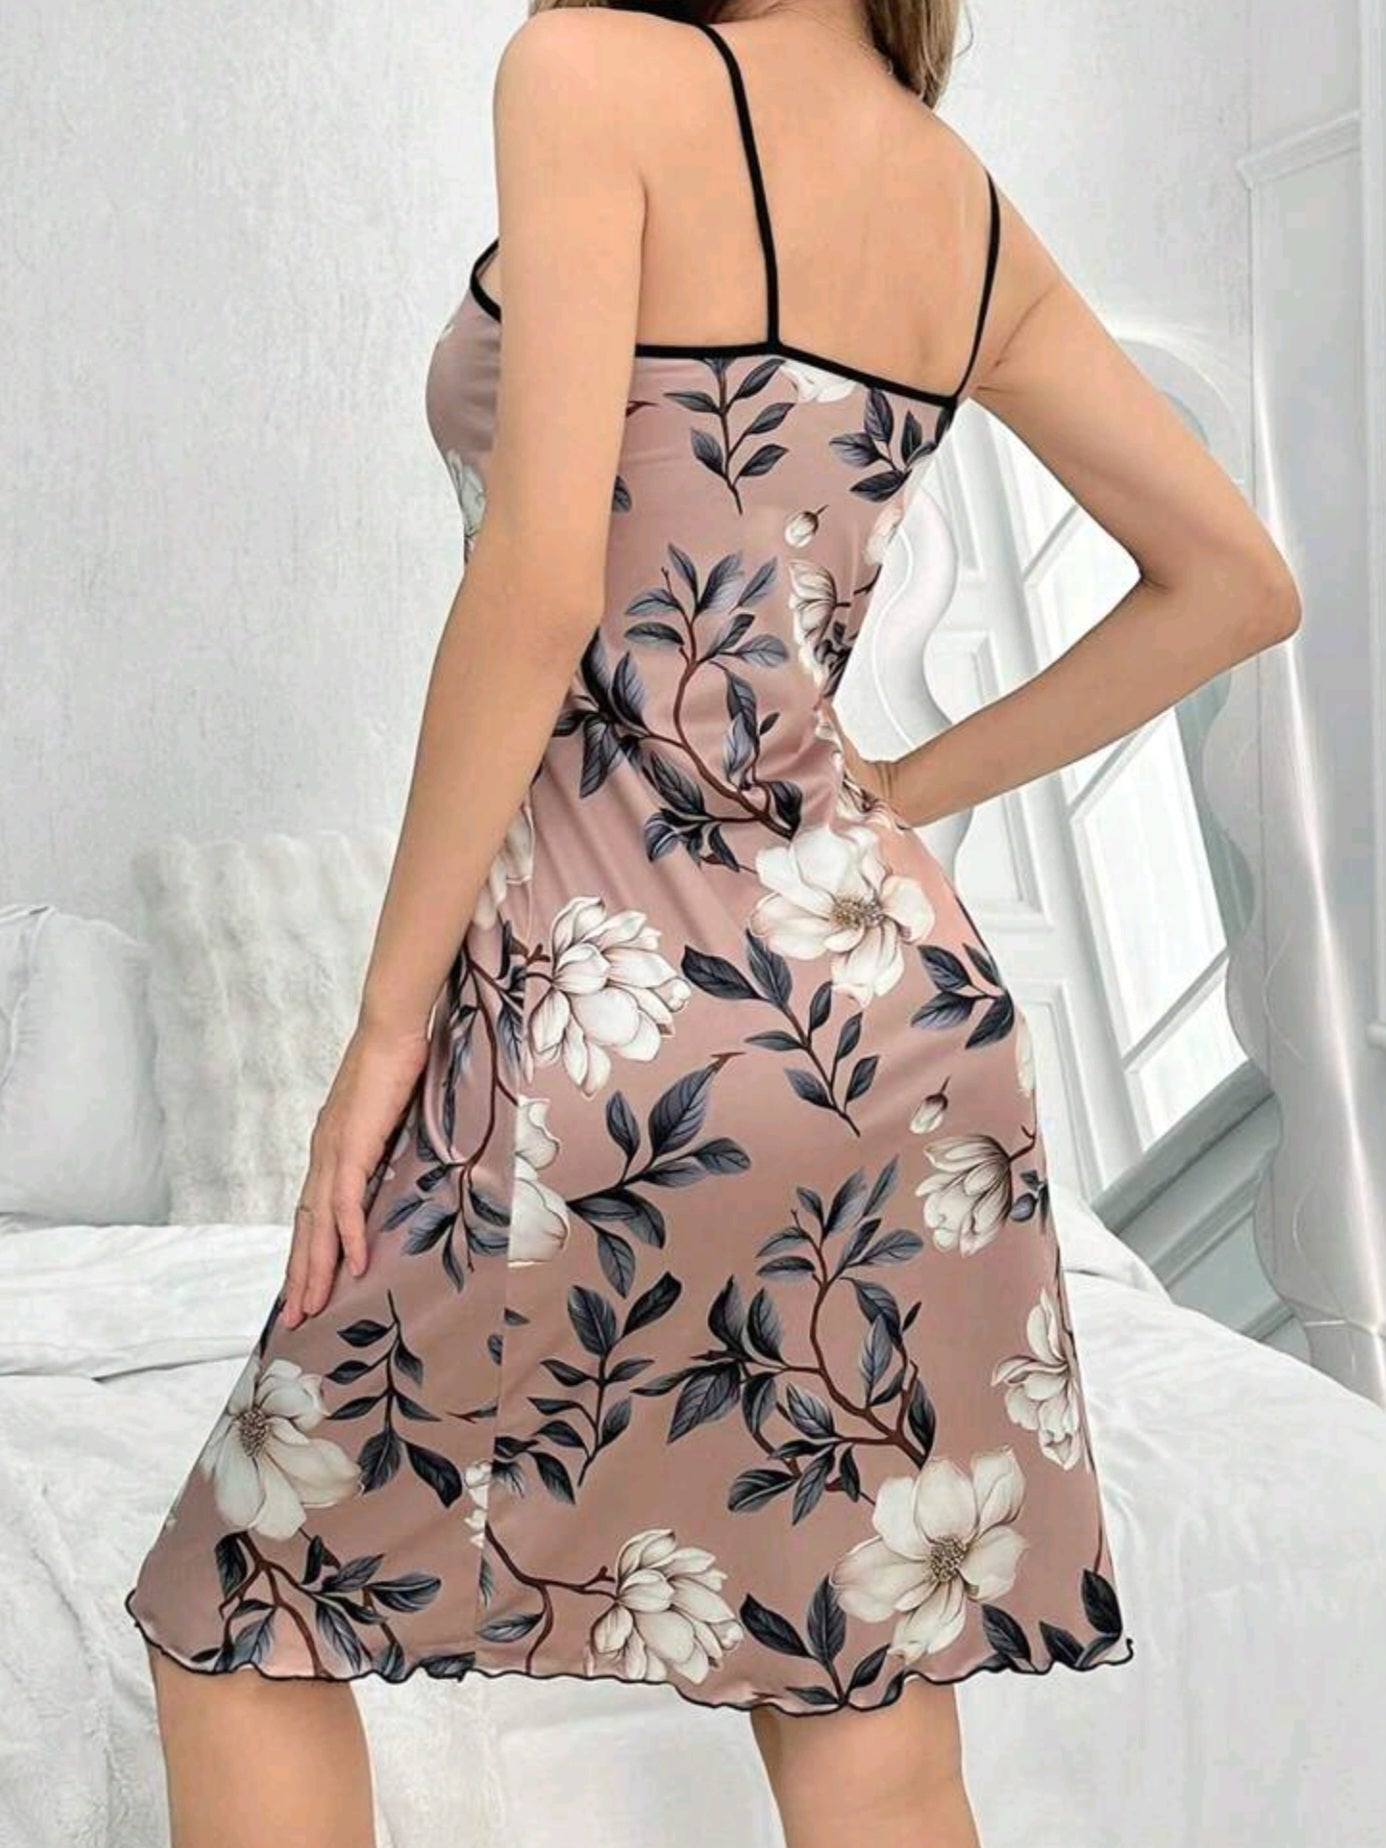 Floral Plant Printed Strappy Sleep Dress